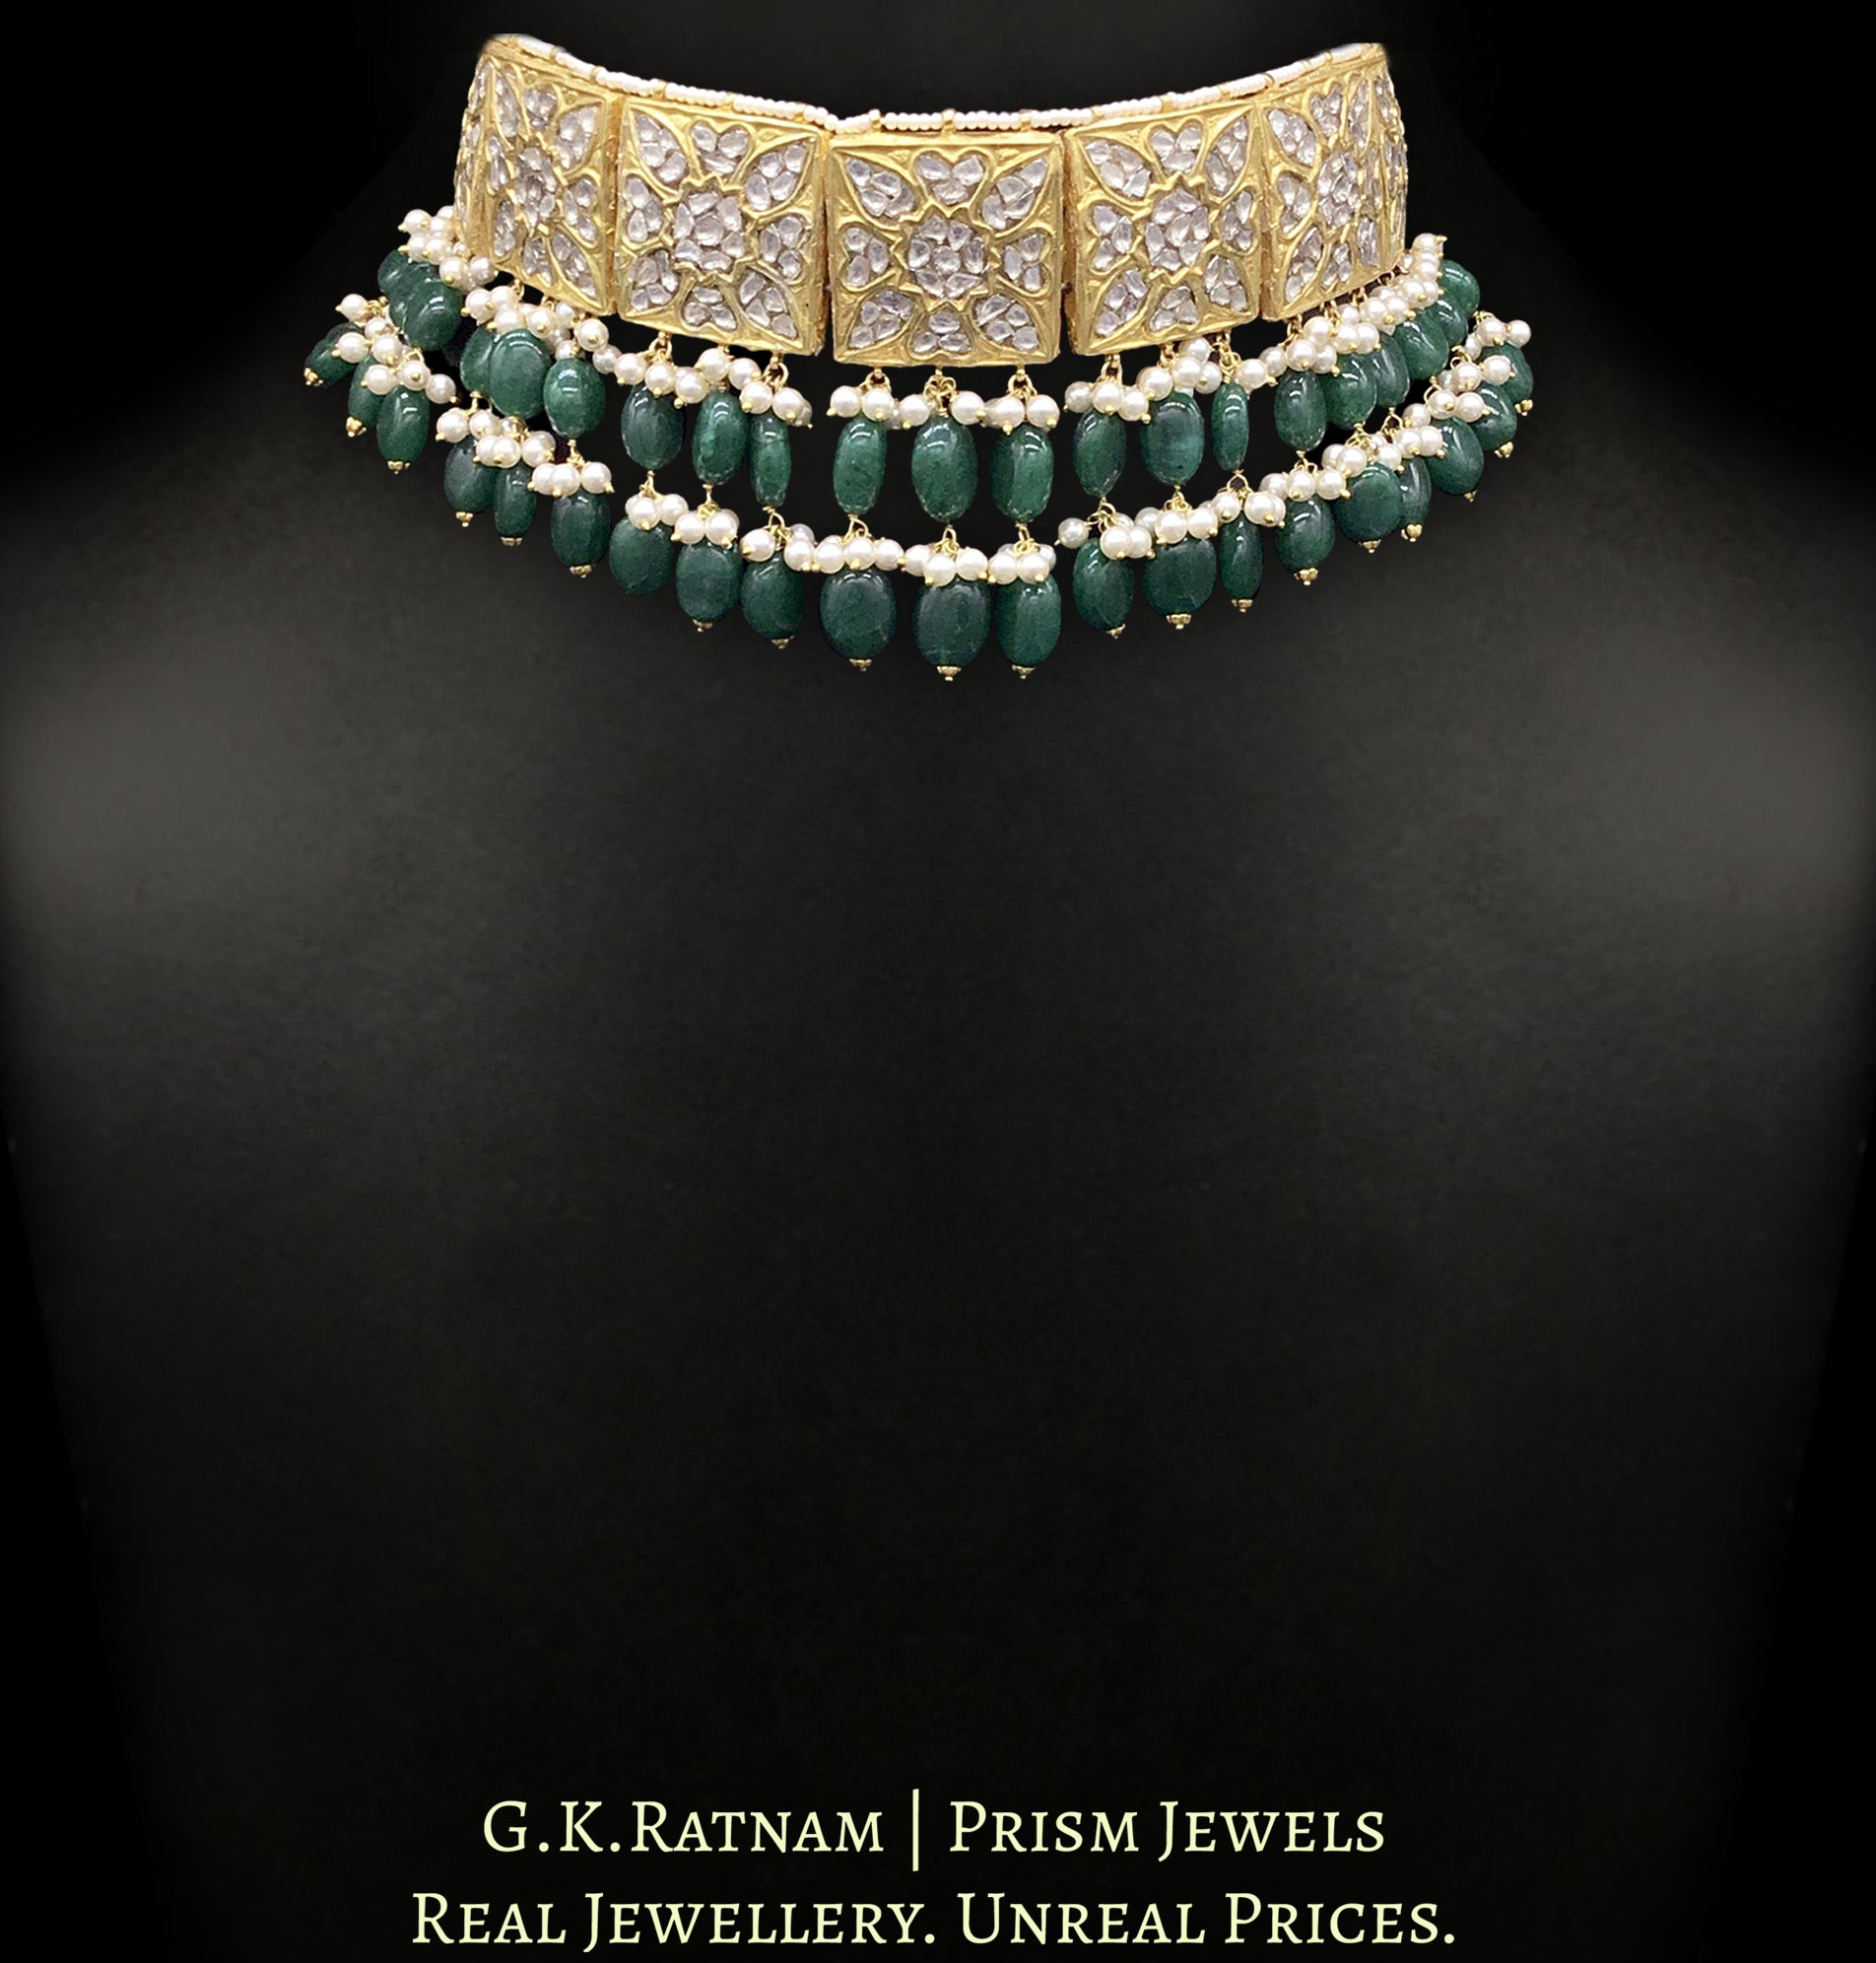 23k Gold and Diamond Polki Square Choker Necklace Set with two-tier green beryl stringing